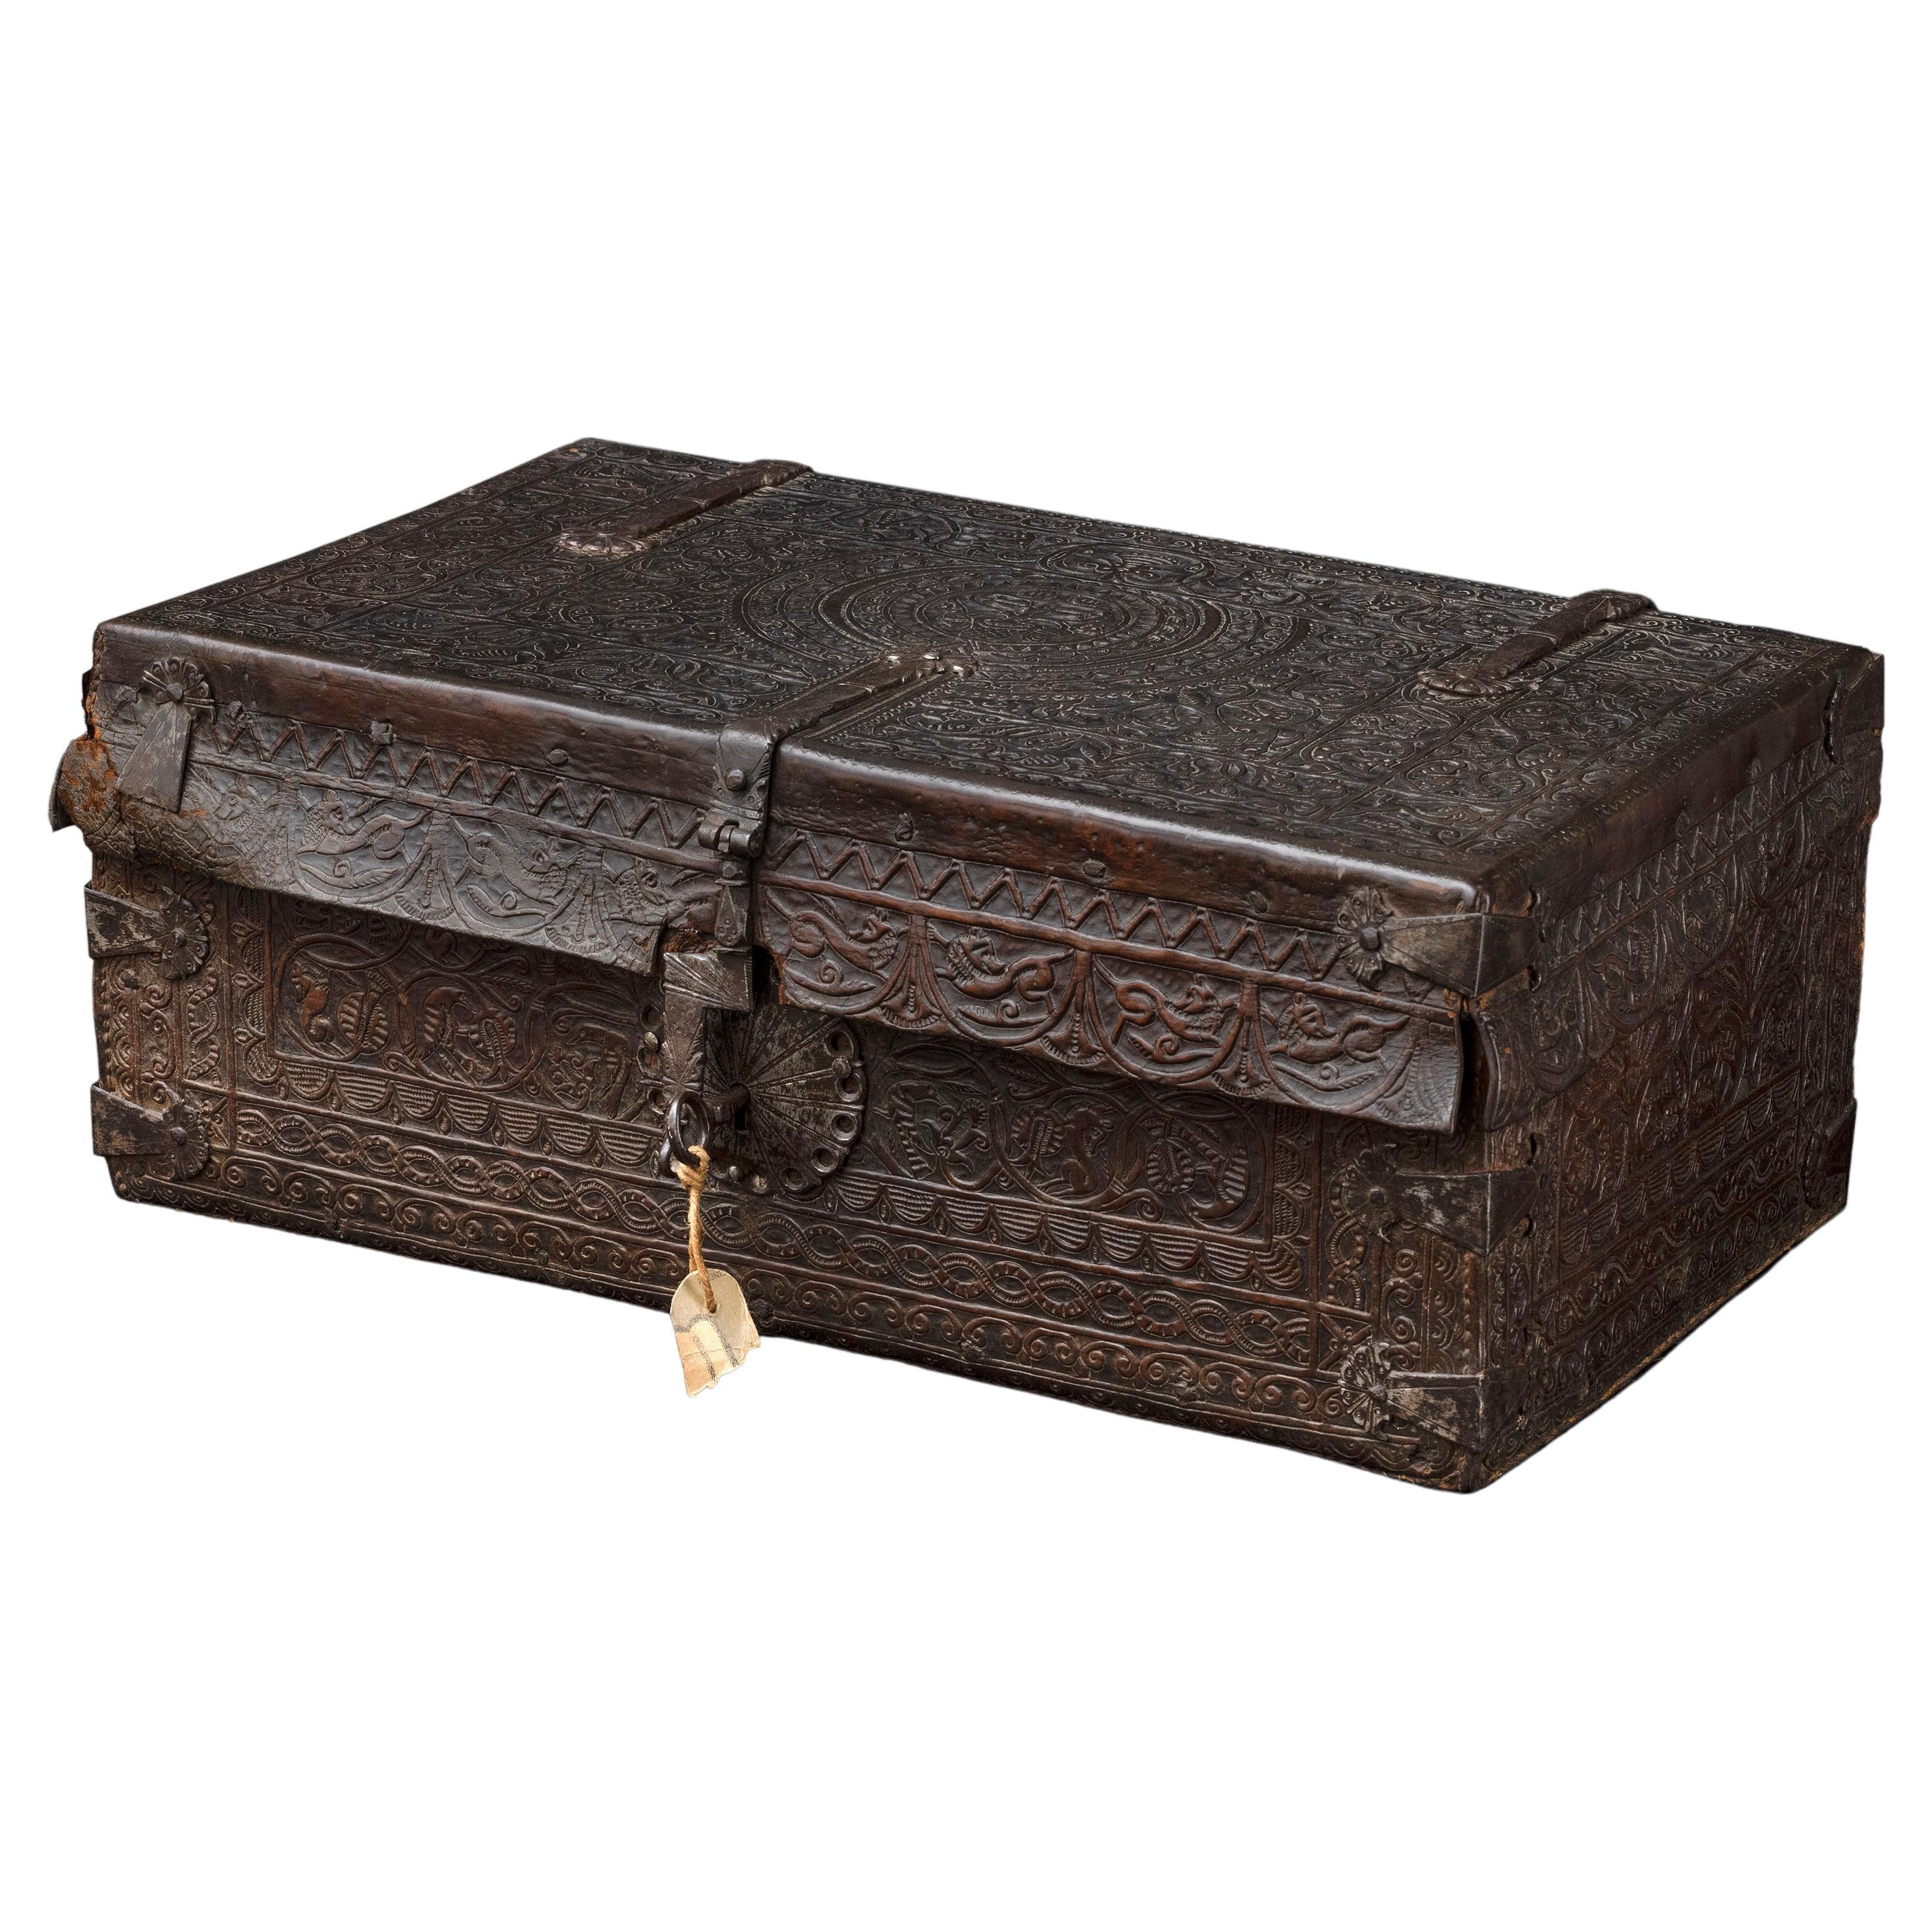 Boiled Leather Trunk, Spanish, 17th Century For Sale